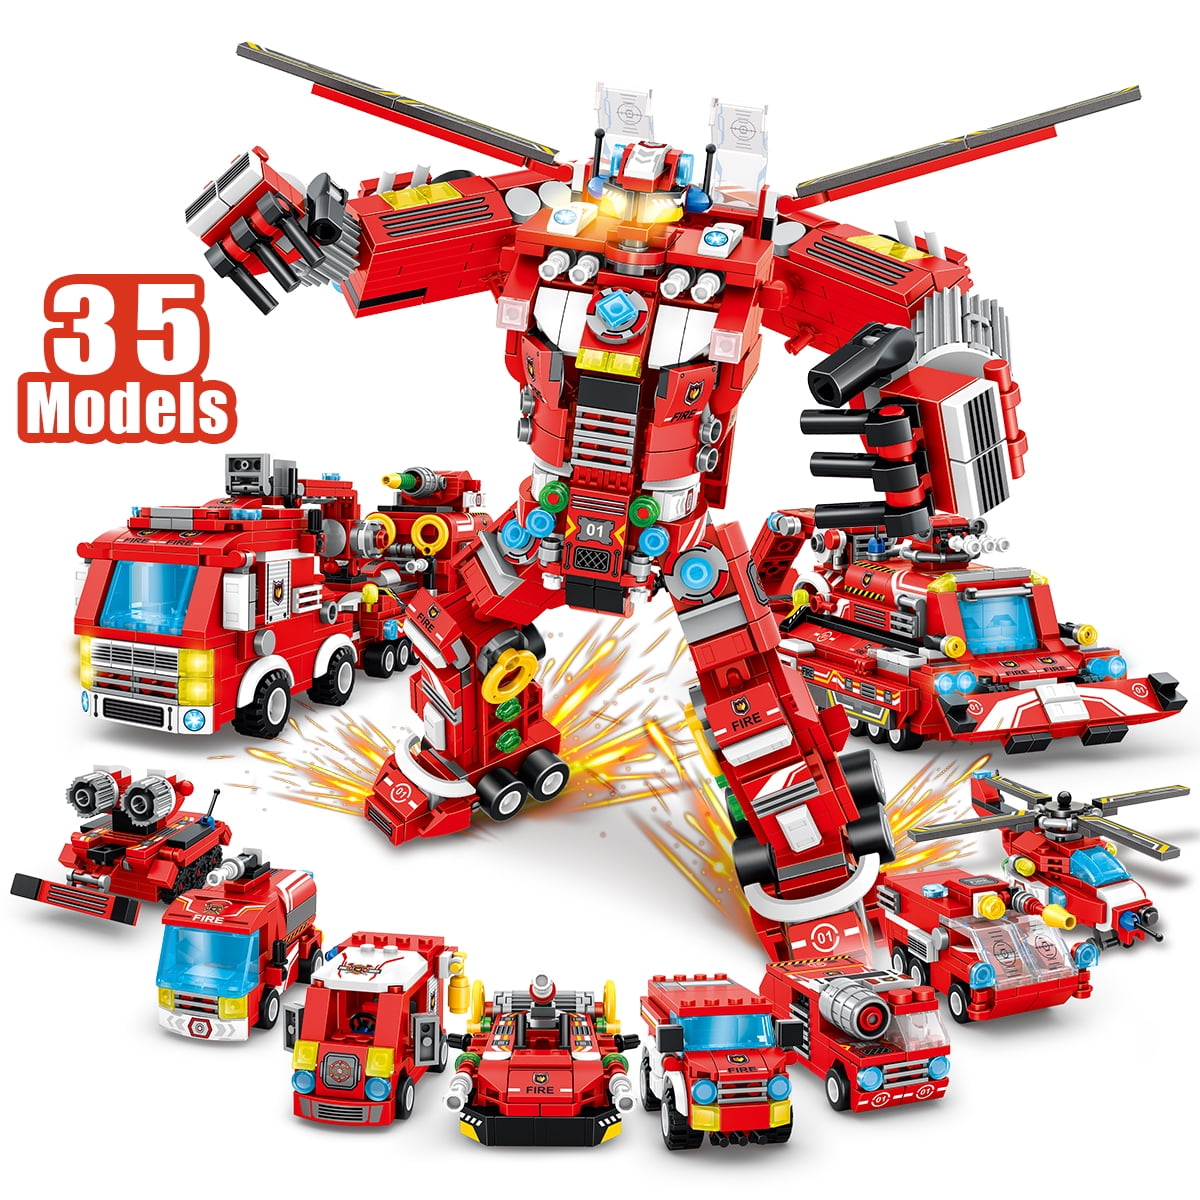 JUMEI STEM Robot Building Toys 12-in-1Building Blocks Toys for 6 Year Dld Boys,Construction Vehicles Kit Building Blocks Best Gifts for Kids Aged 8 9 10 11 Yr Old 376 PCS Engineering Building Bricks